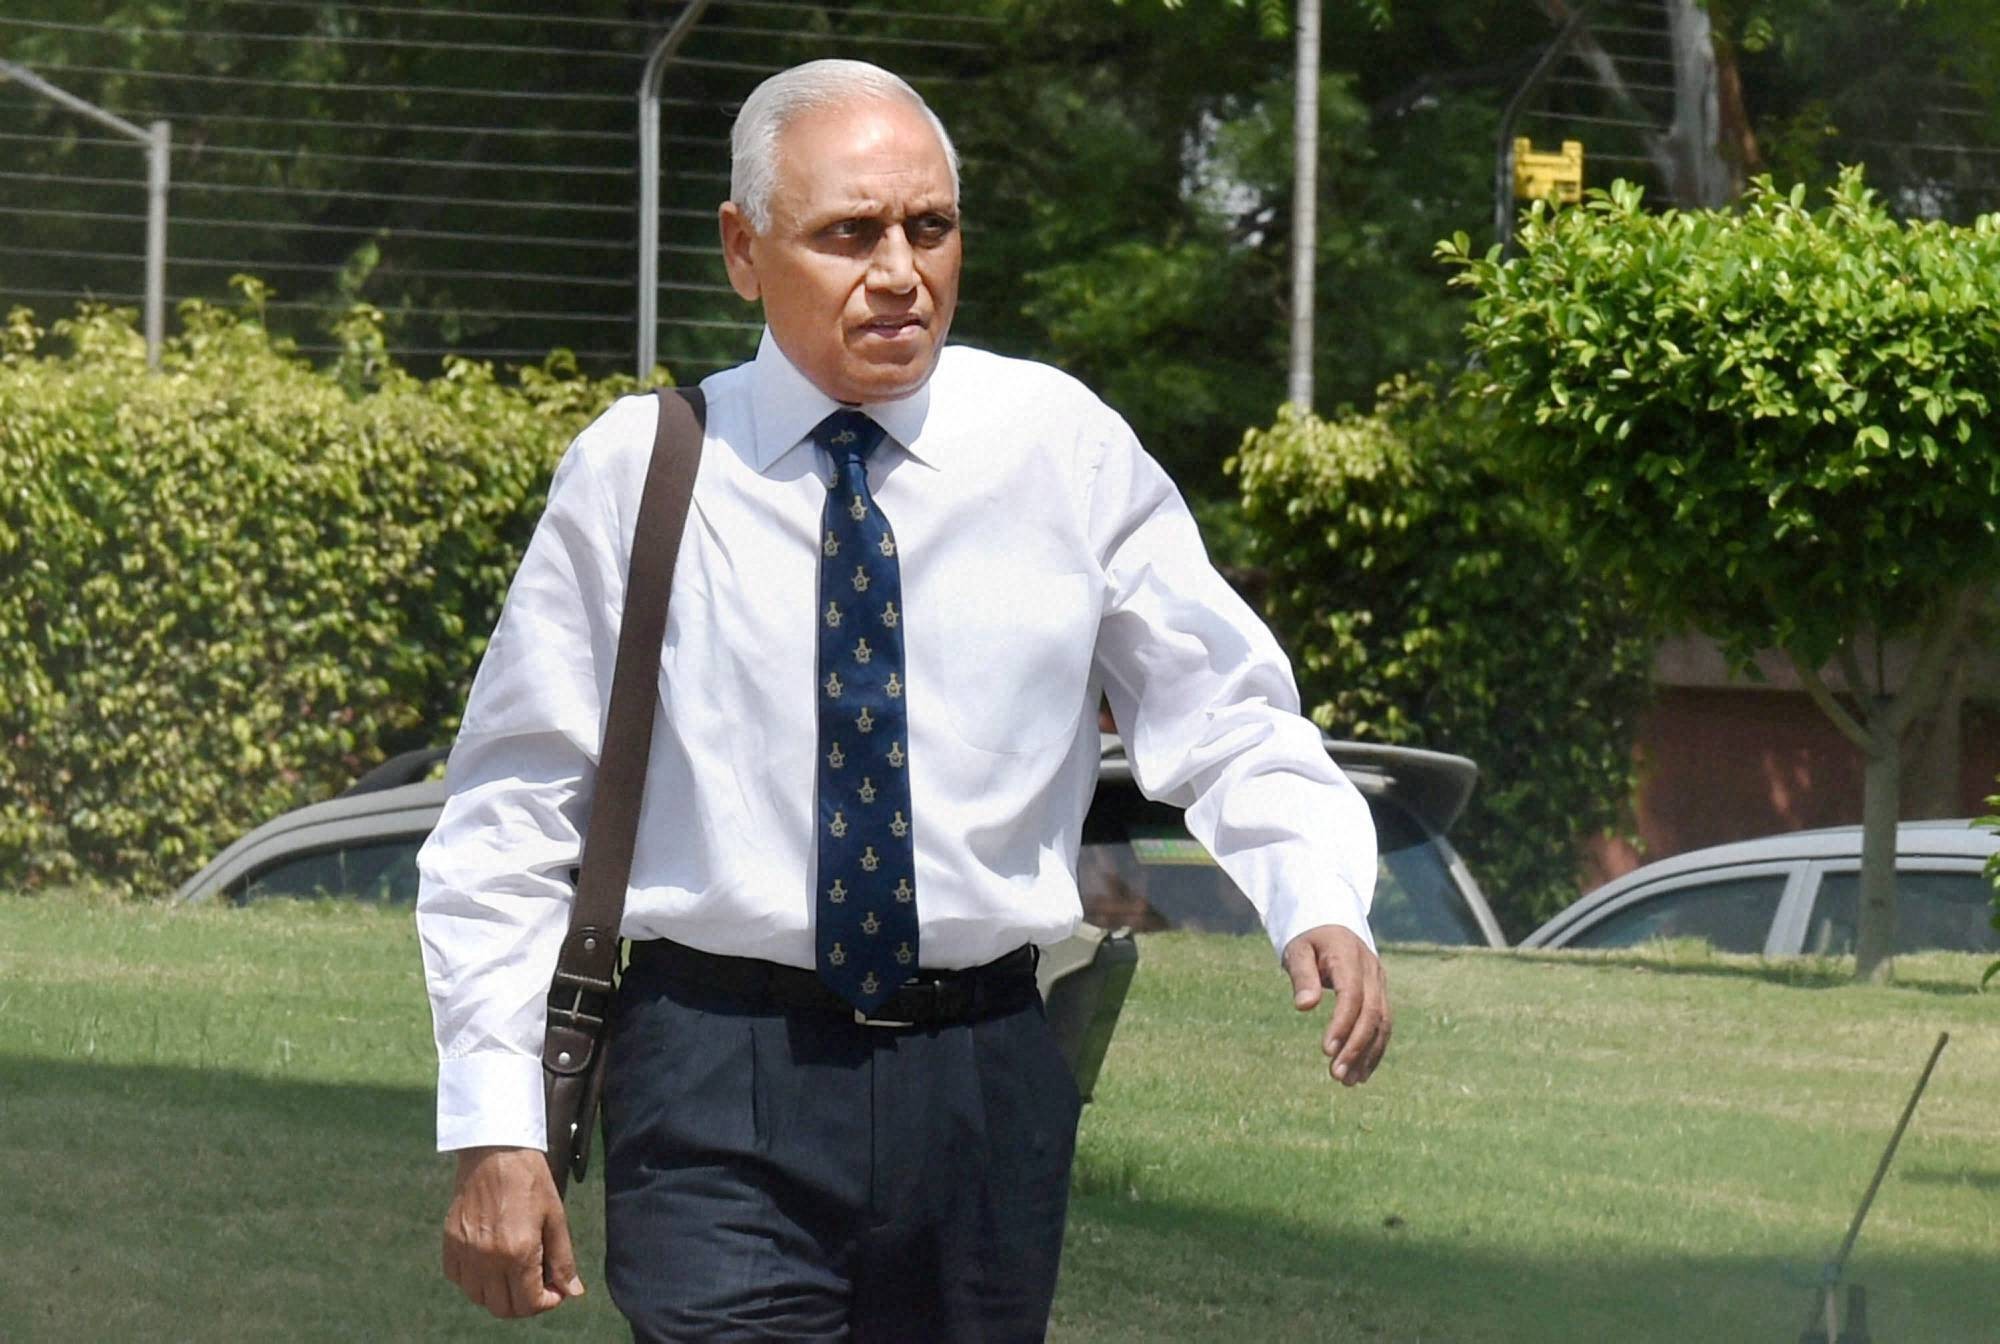 VVIP Chopper Deal Case: Court Issues Summons To Ex-IAF Chief S P Tyagi